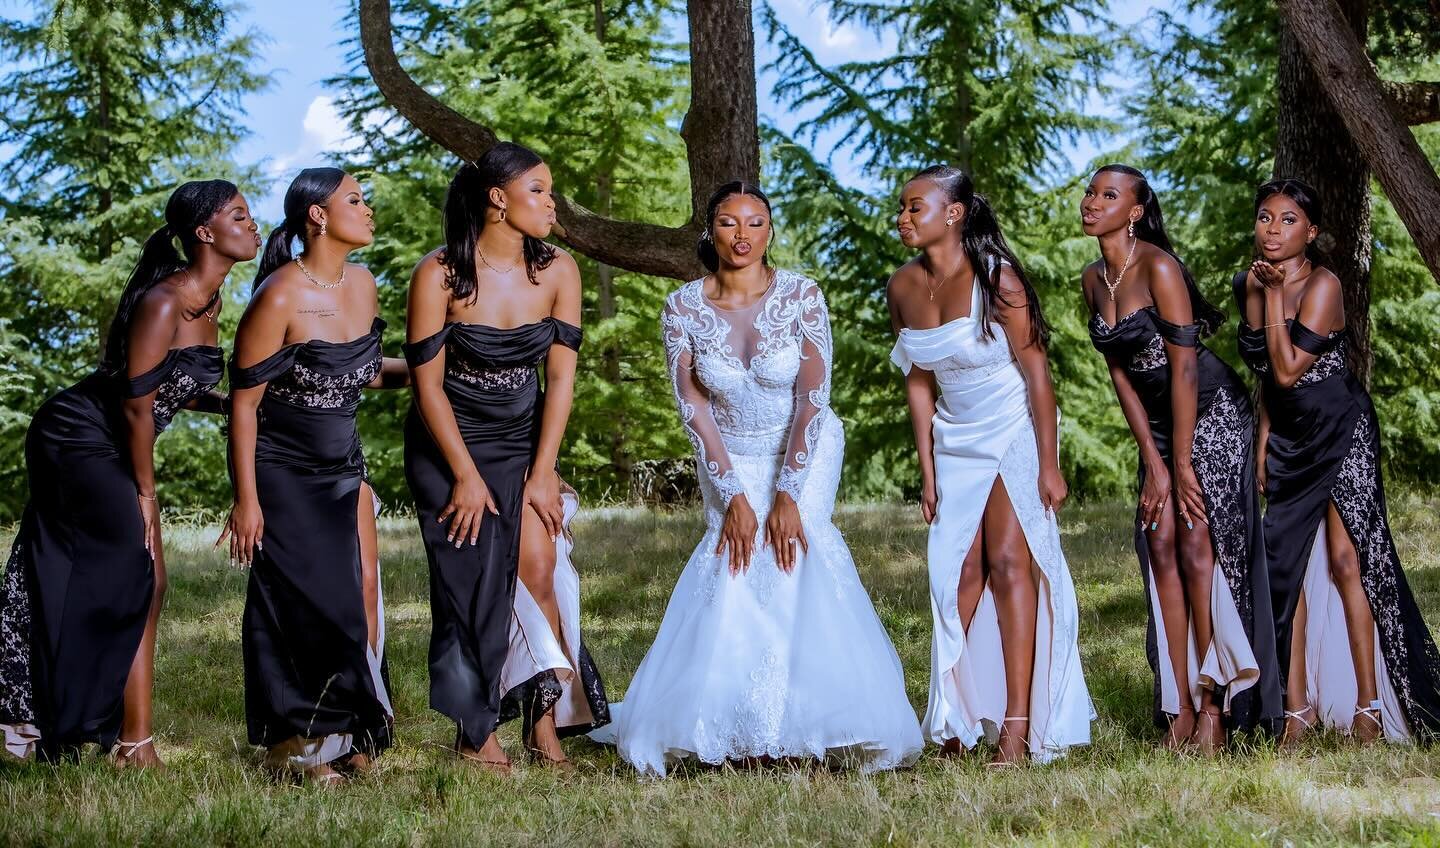 This bridal team is serving major beauty goals #glamsquad 

Enjoy 20% off all bridal makeup packages throughout the month, valid for weddings on future dates.

Fill in our Bridal Enquiry Form to get your quote. Link is located in our bio.

#bridalboo